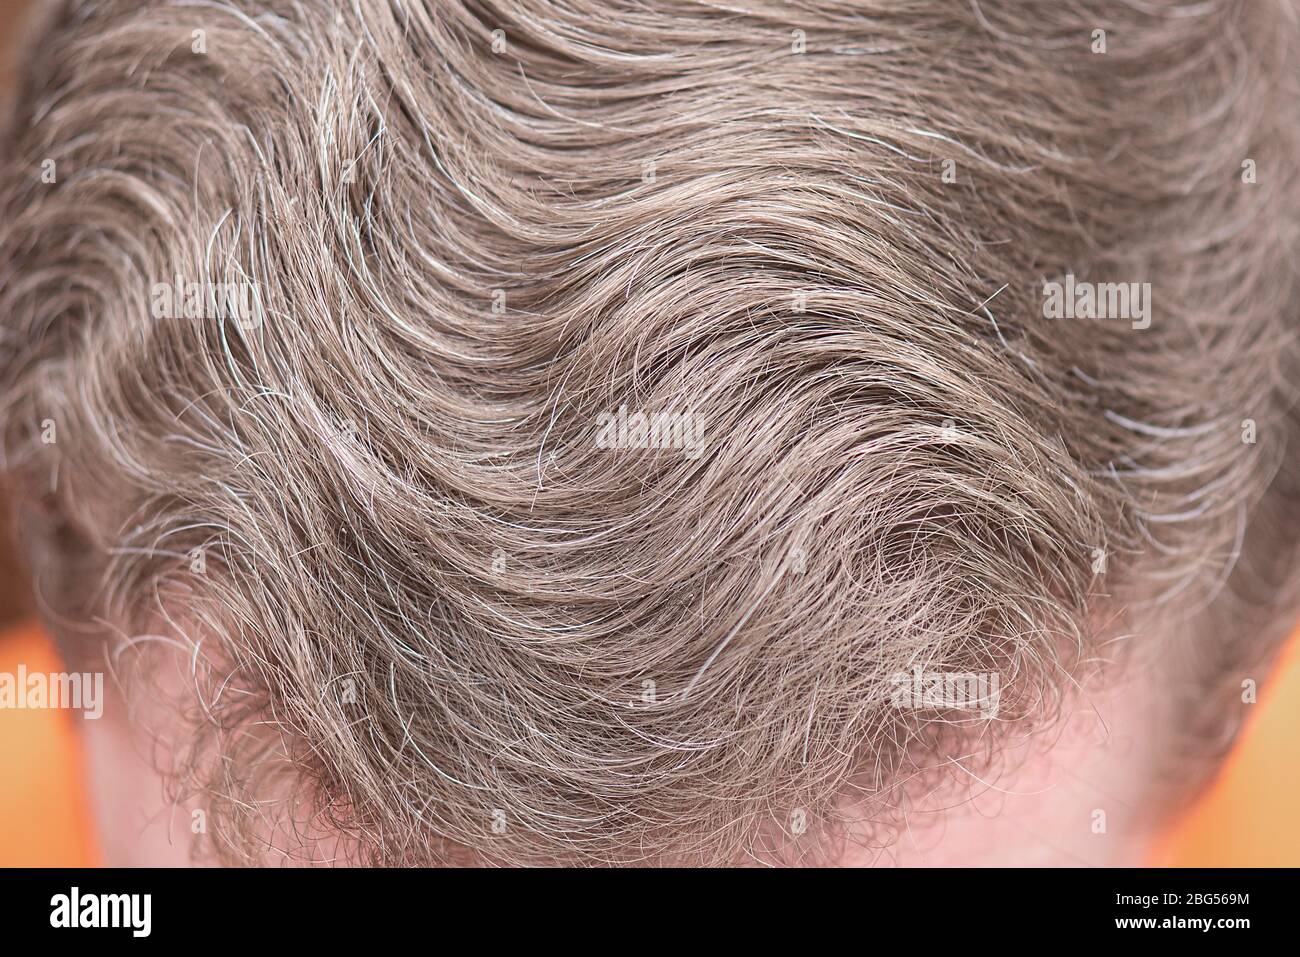 Close-up head of man with light brown hair Stock Photo